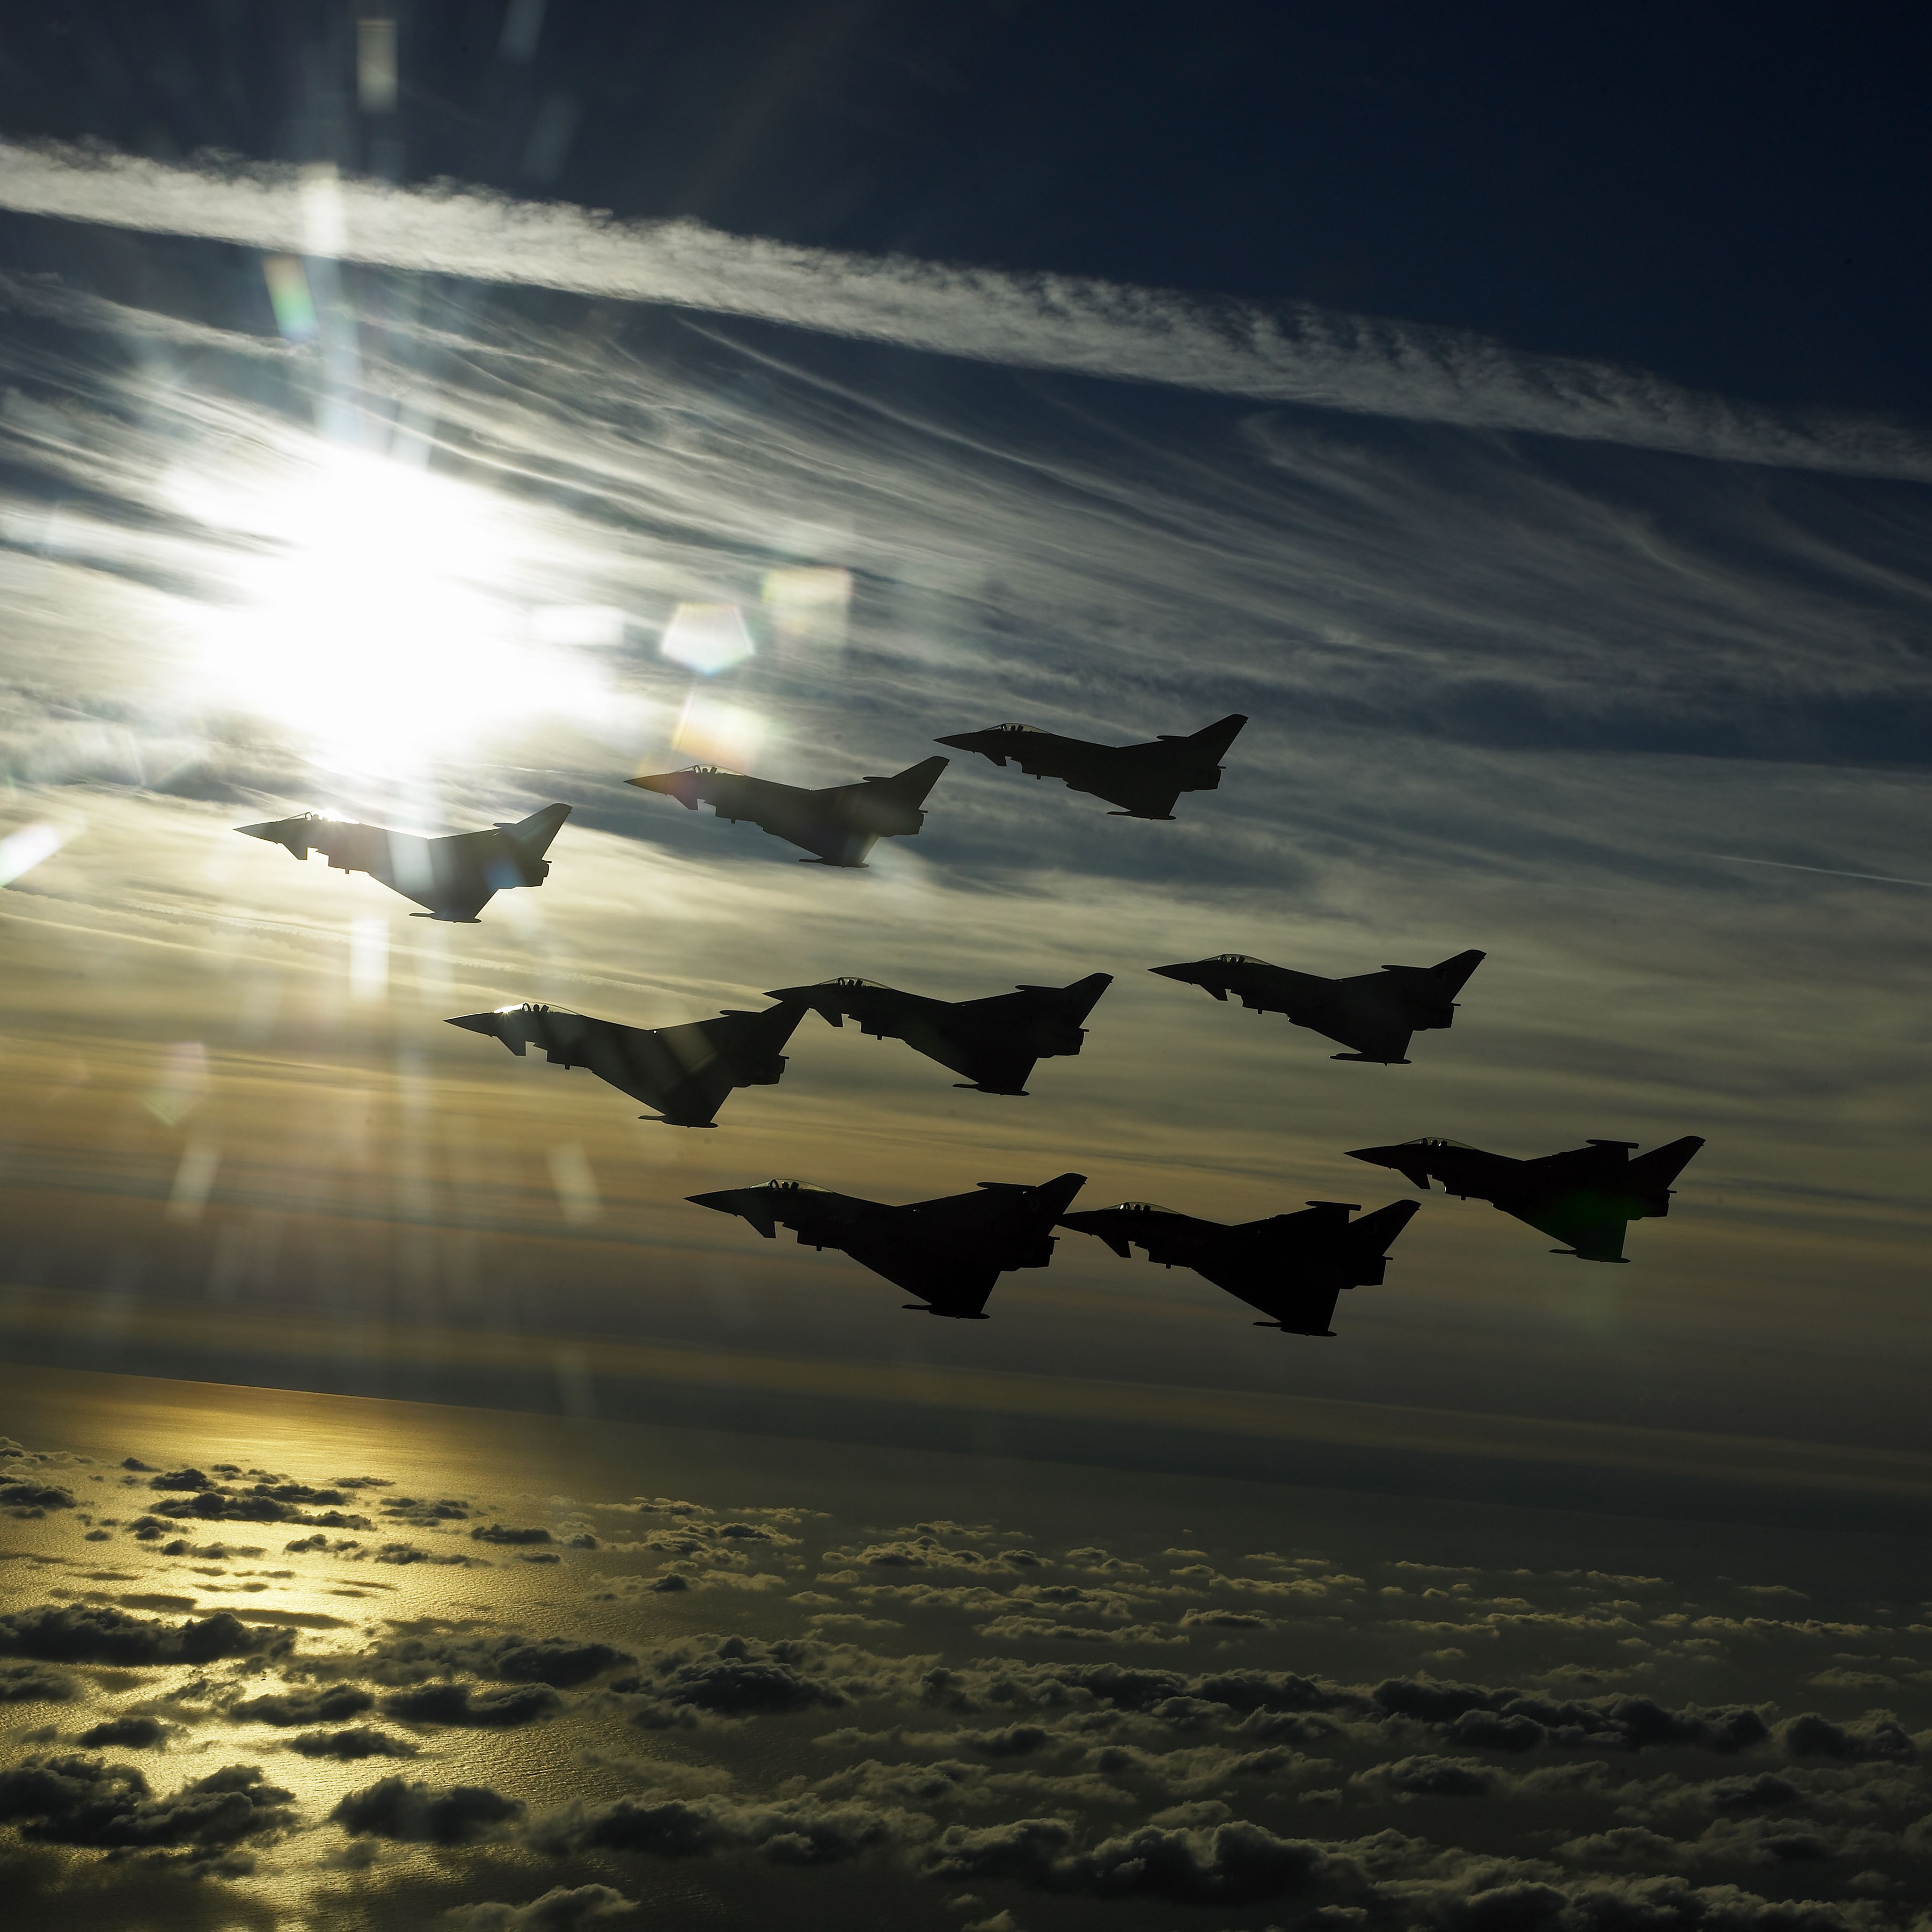 General 3600x3600 Eurofighter Typhoon jet fighter airplane aircraft sky military aircraft vehicle military Formation silhouette